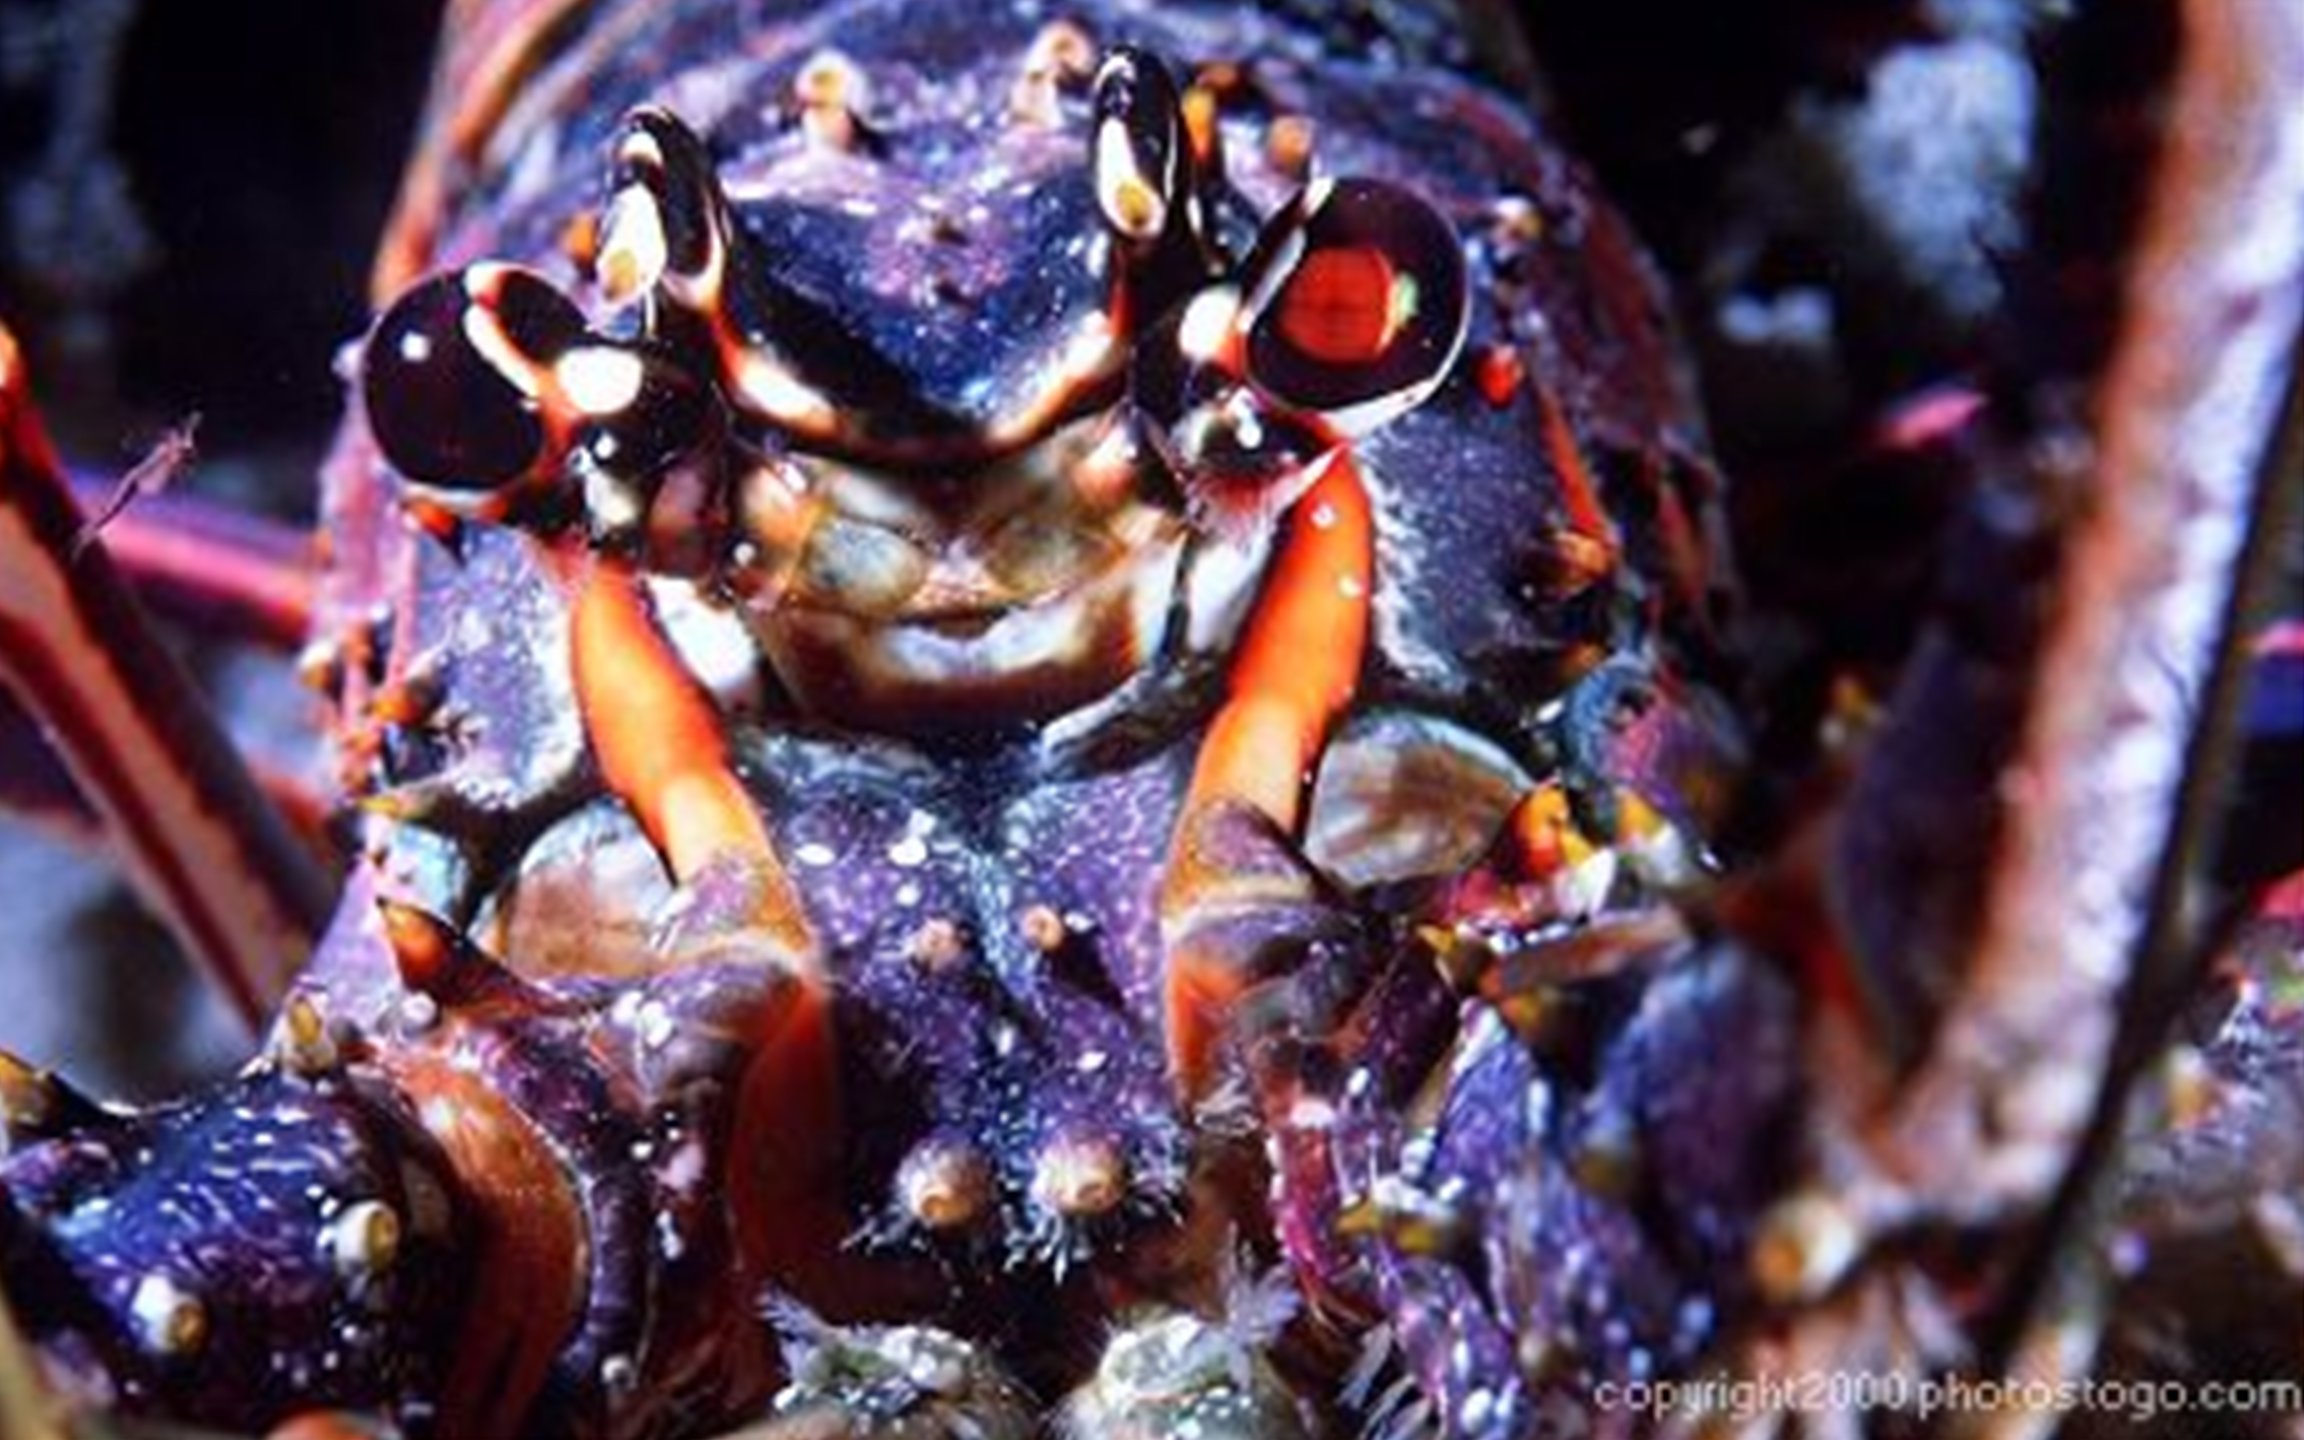 Close up photo of Caribbean spiny lobster face (Photo Credit: Peter Bouwma)